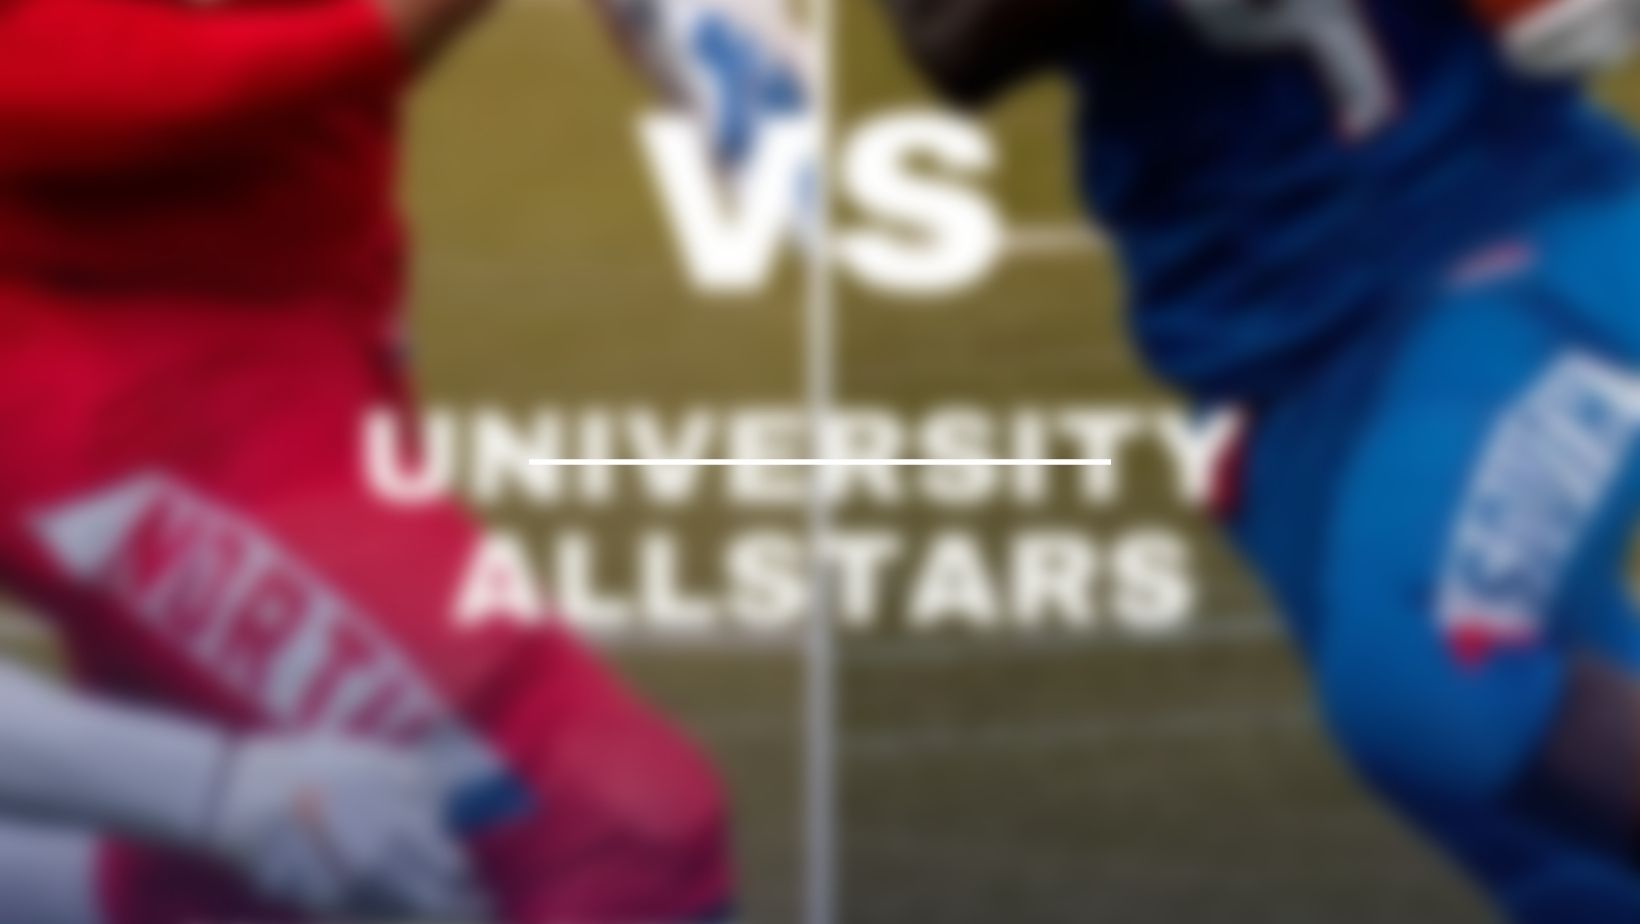 North & South renew university All-Star rivalries